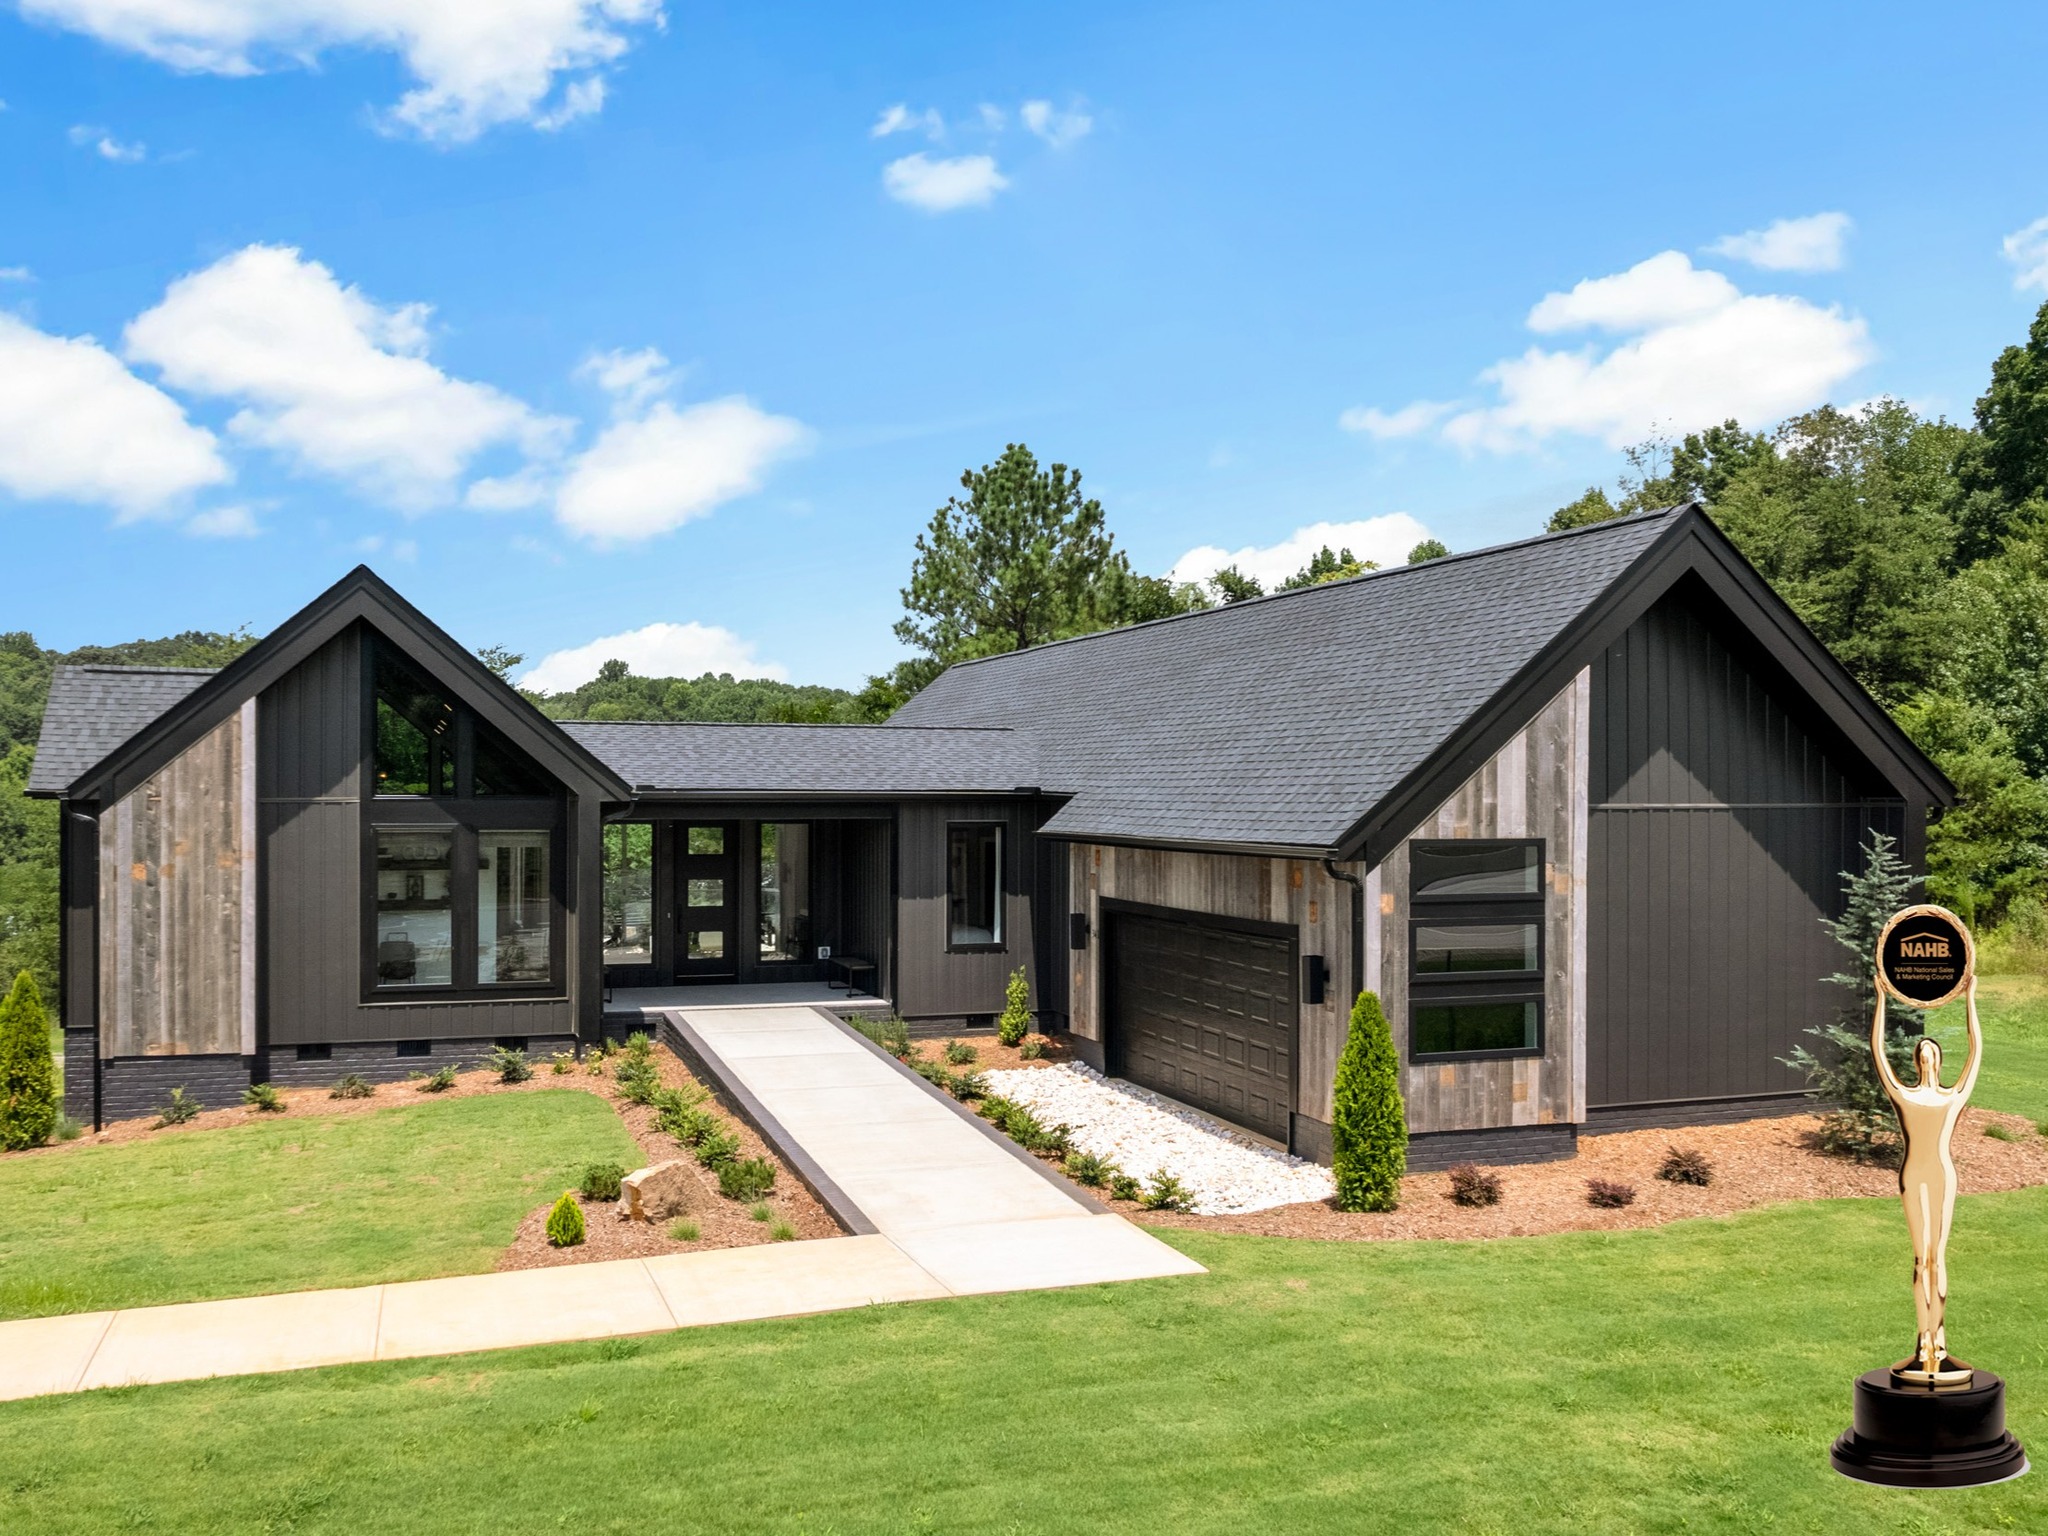 Gold and Silver Awards from the National Association of Home Builders